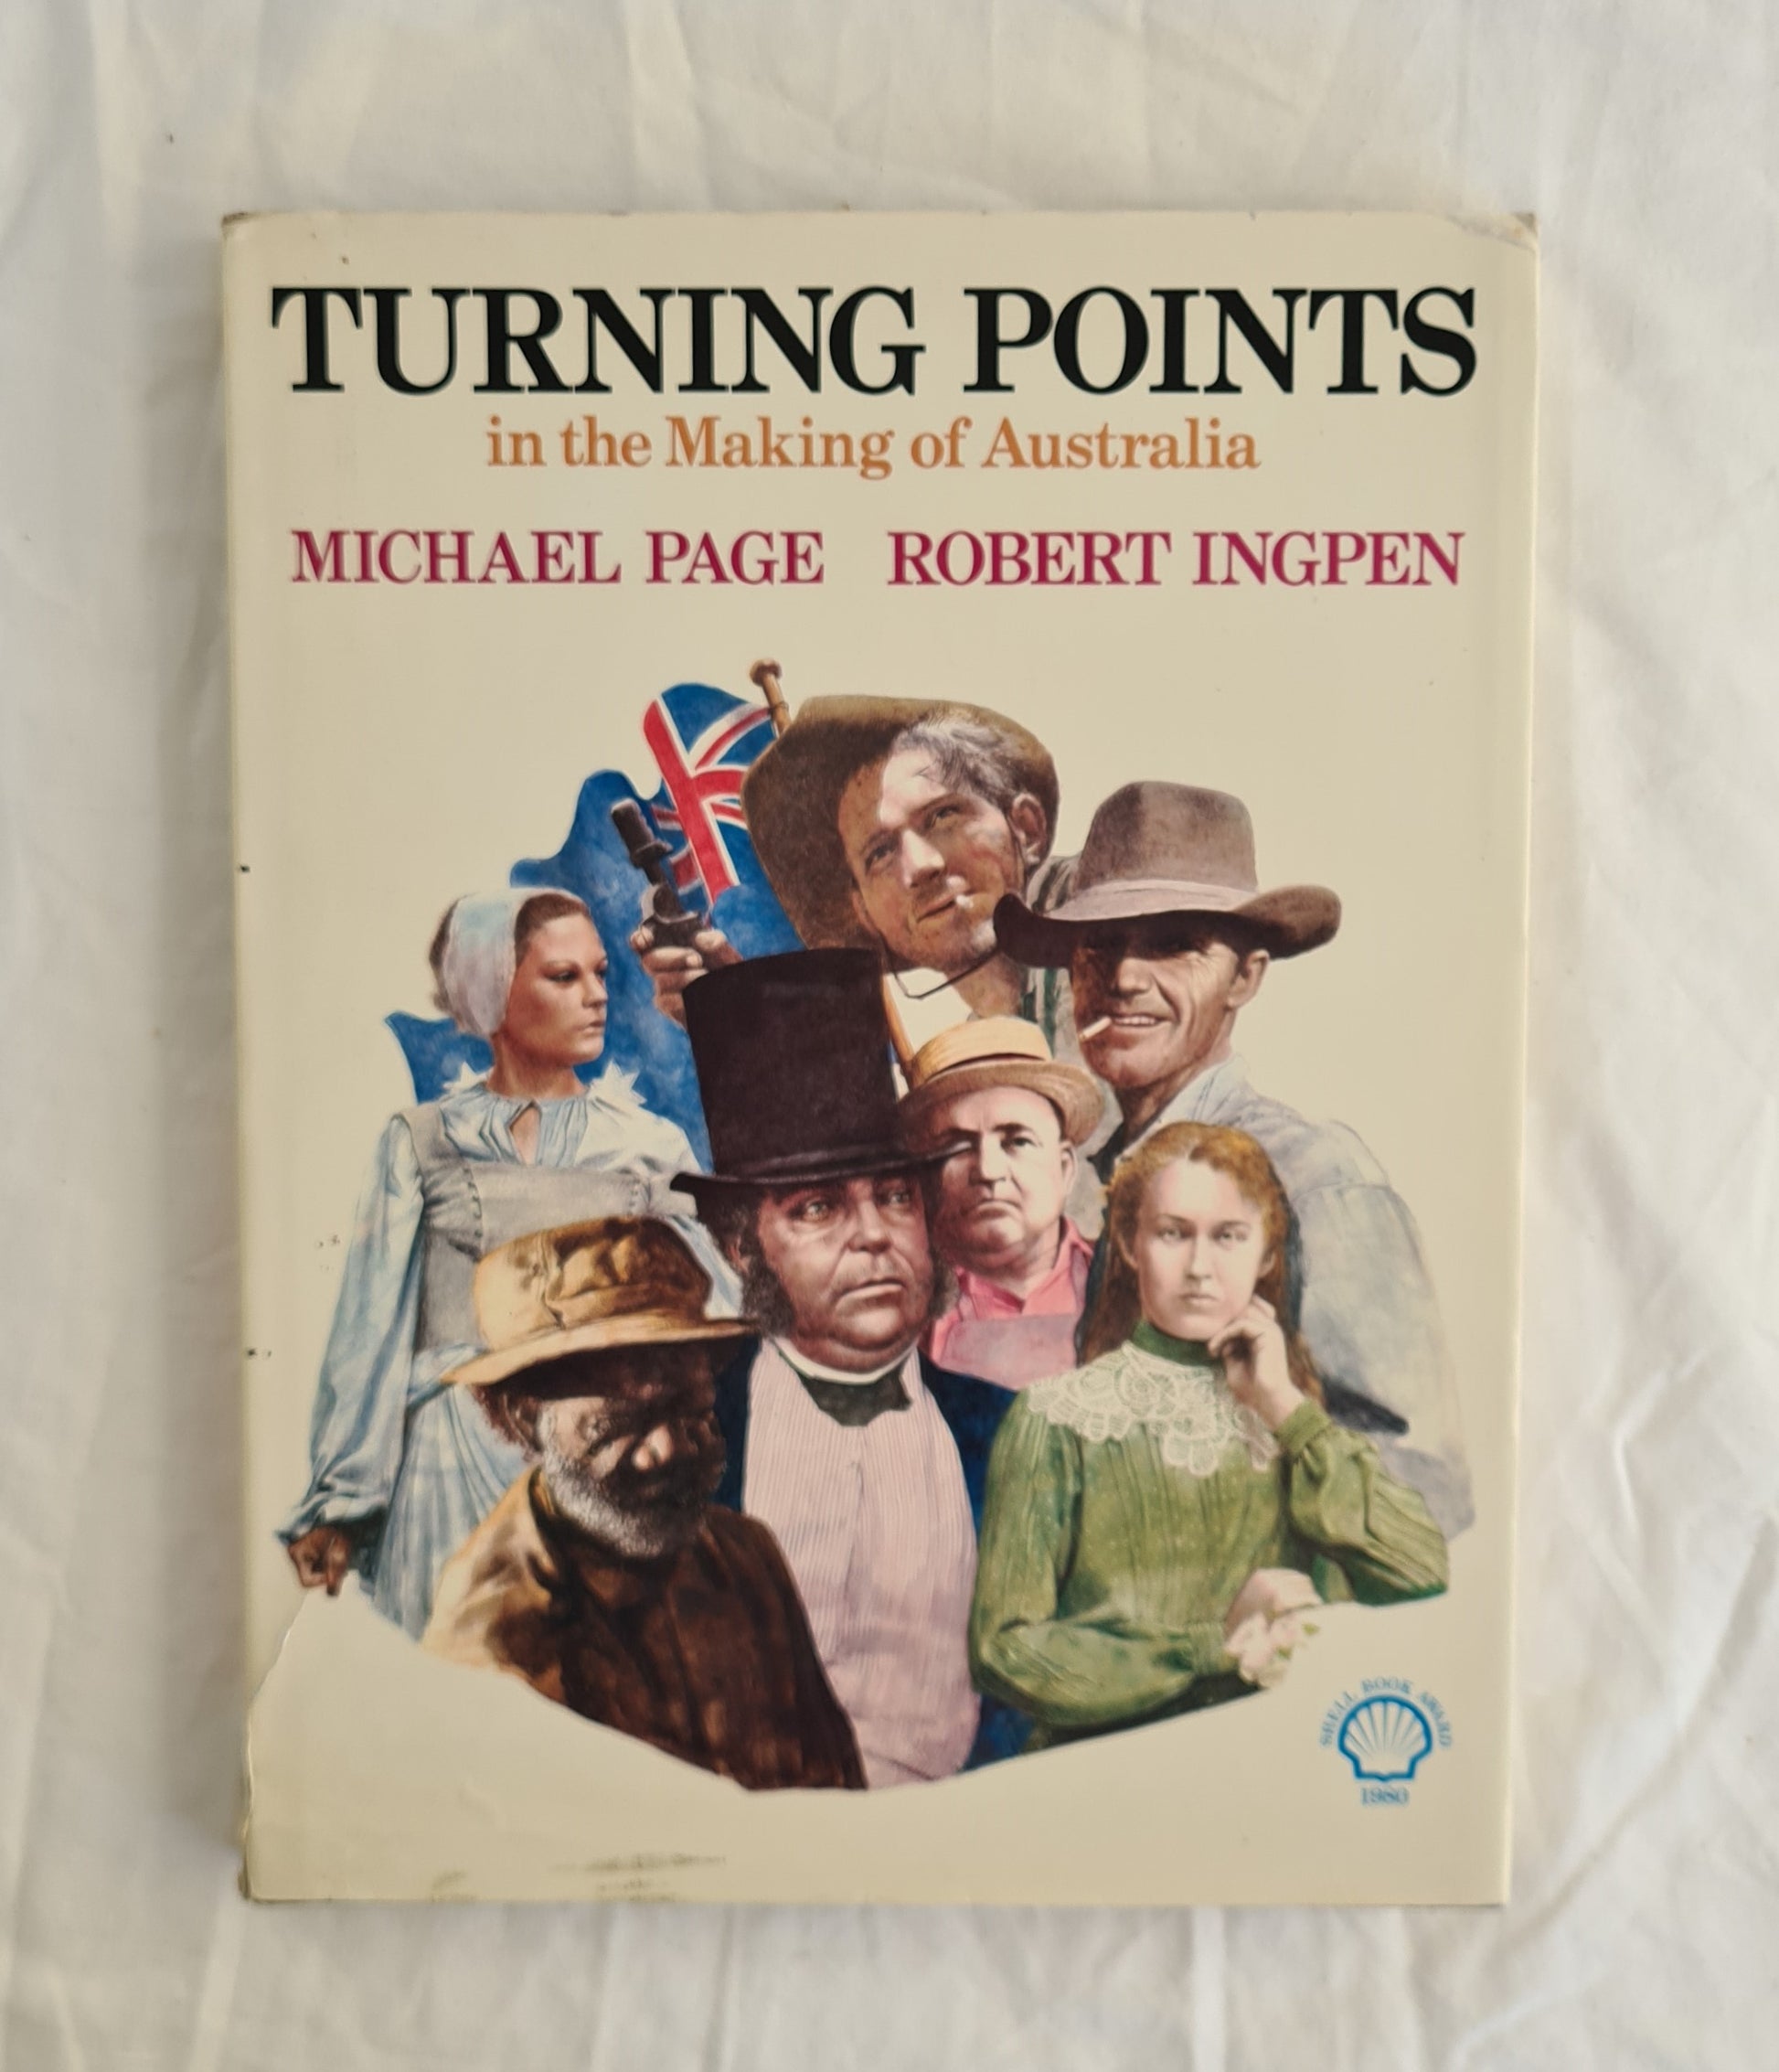 Turning Points  In the Making of Australia  by Michael Page  illustrations by Robert Ingpen